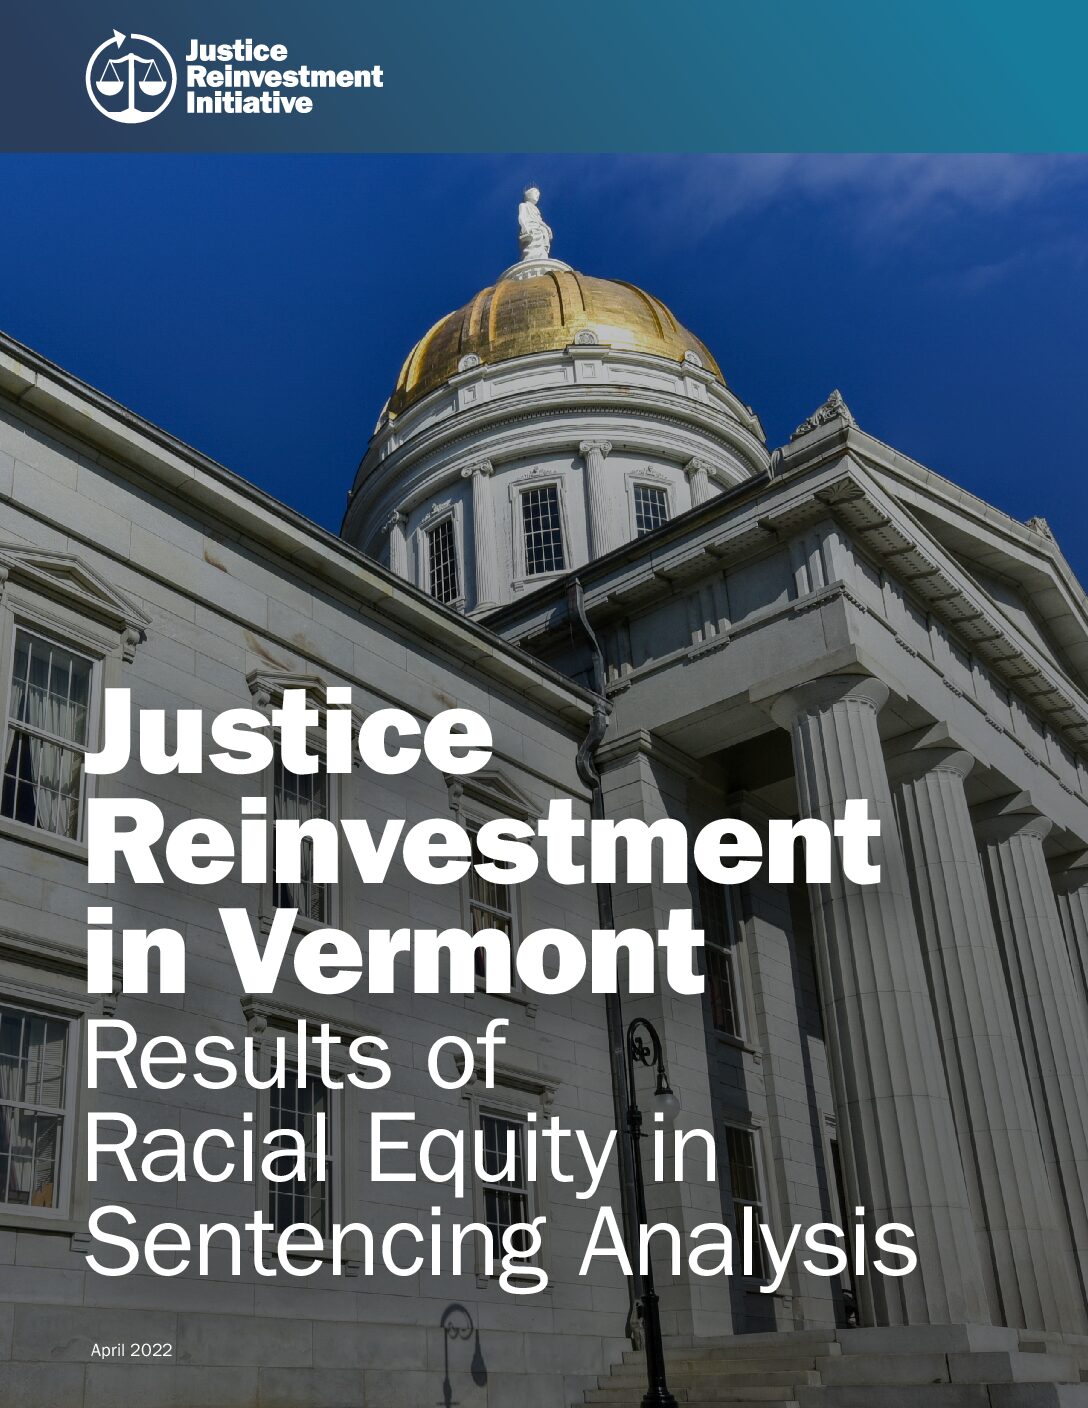 Justice Reinvestment in Vermont Results of Racial Equity in Sentencing Analysis